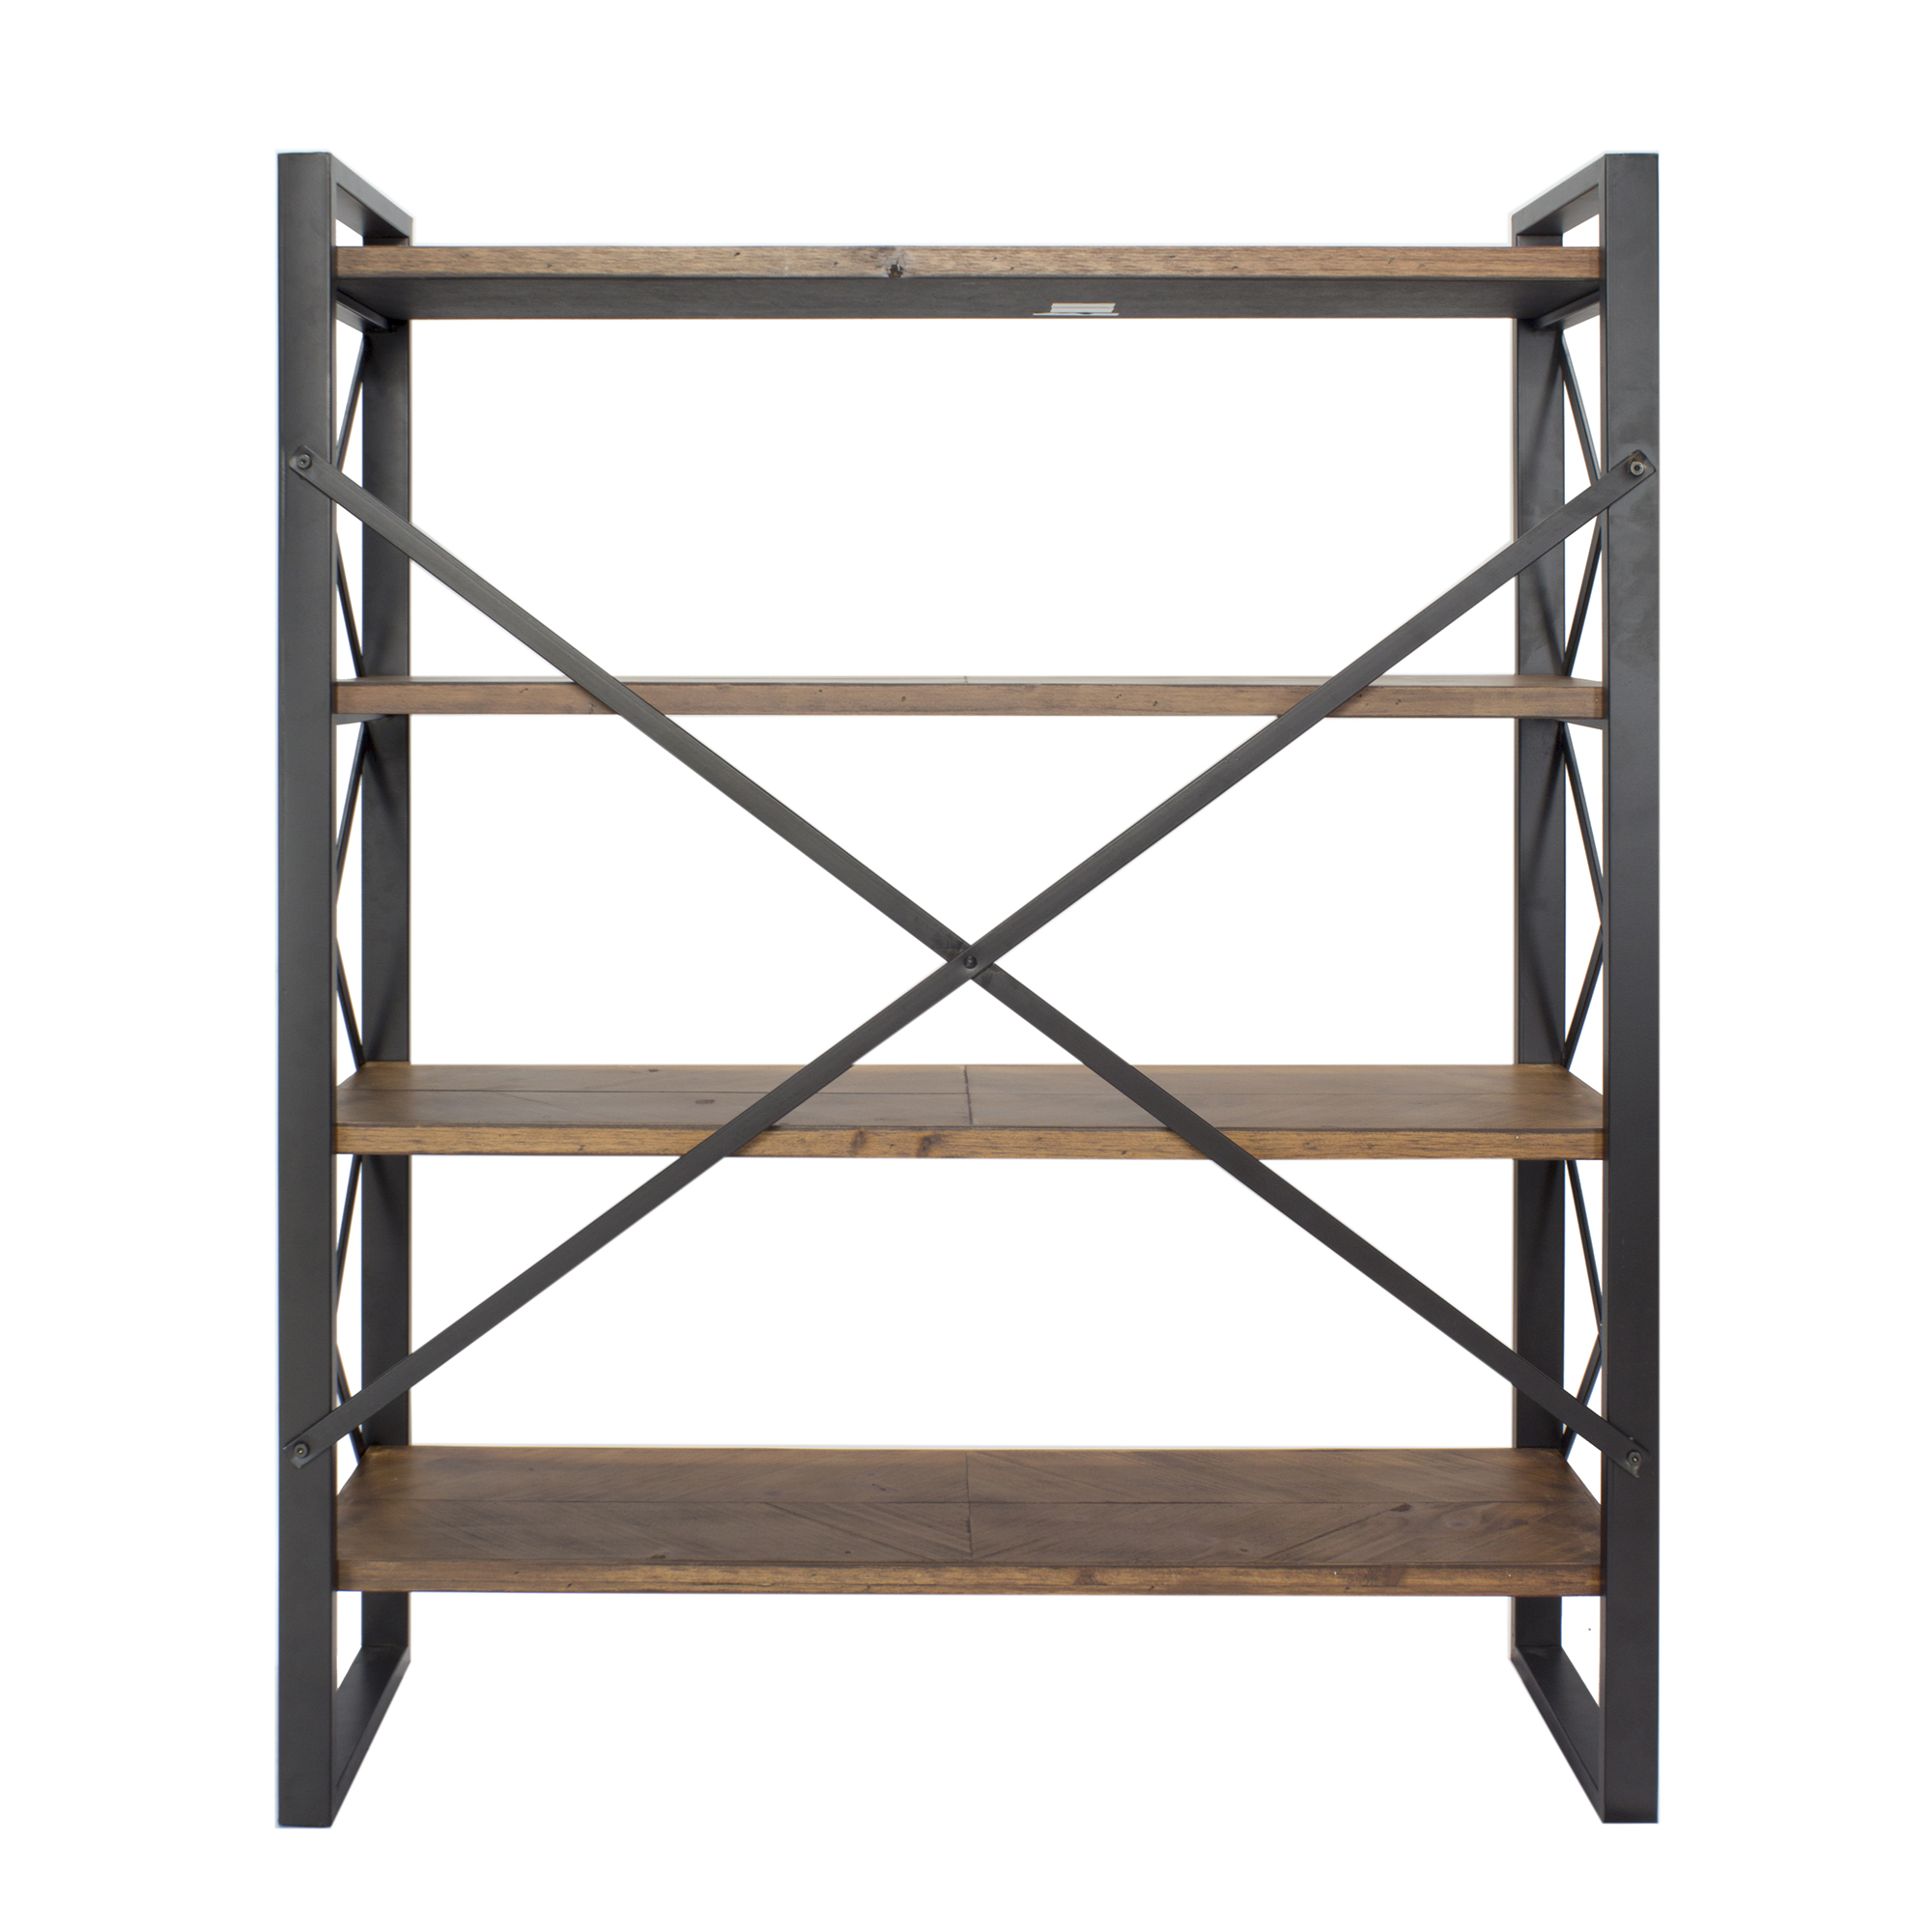 39.75" X 13" X 48.5" Black with Natural Water Hyacinth Metal Wood MDF Bookcase with Shelves